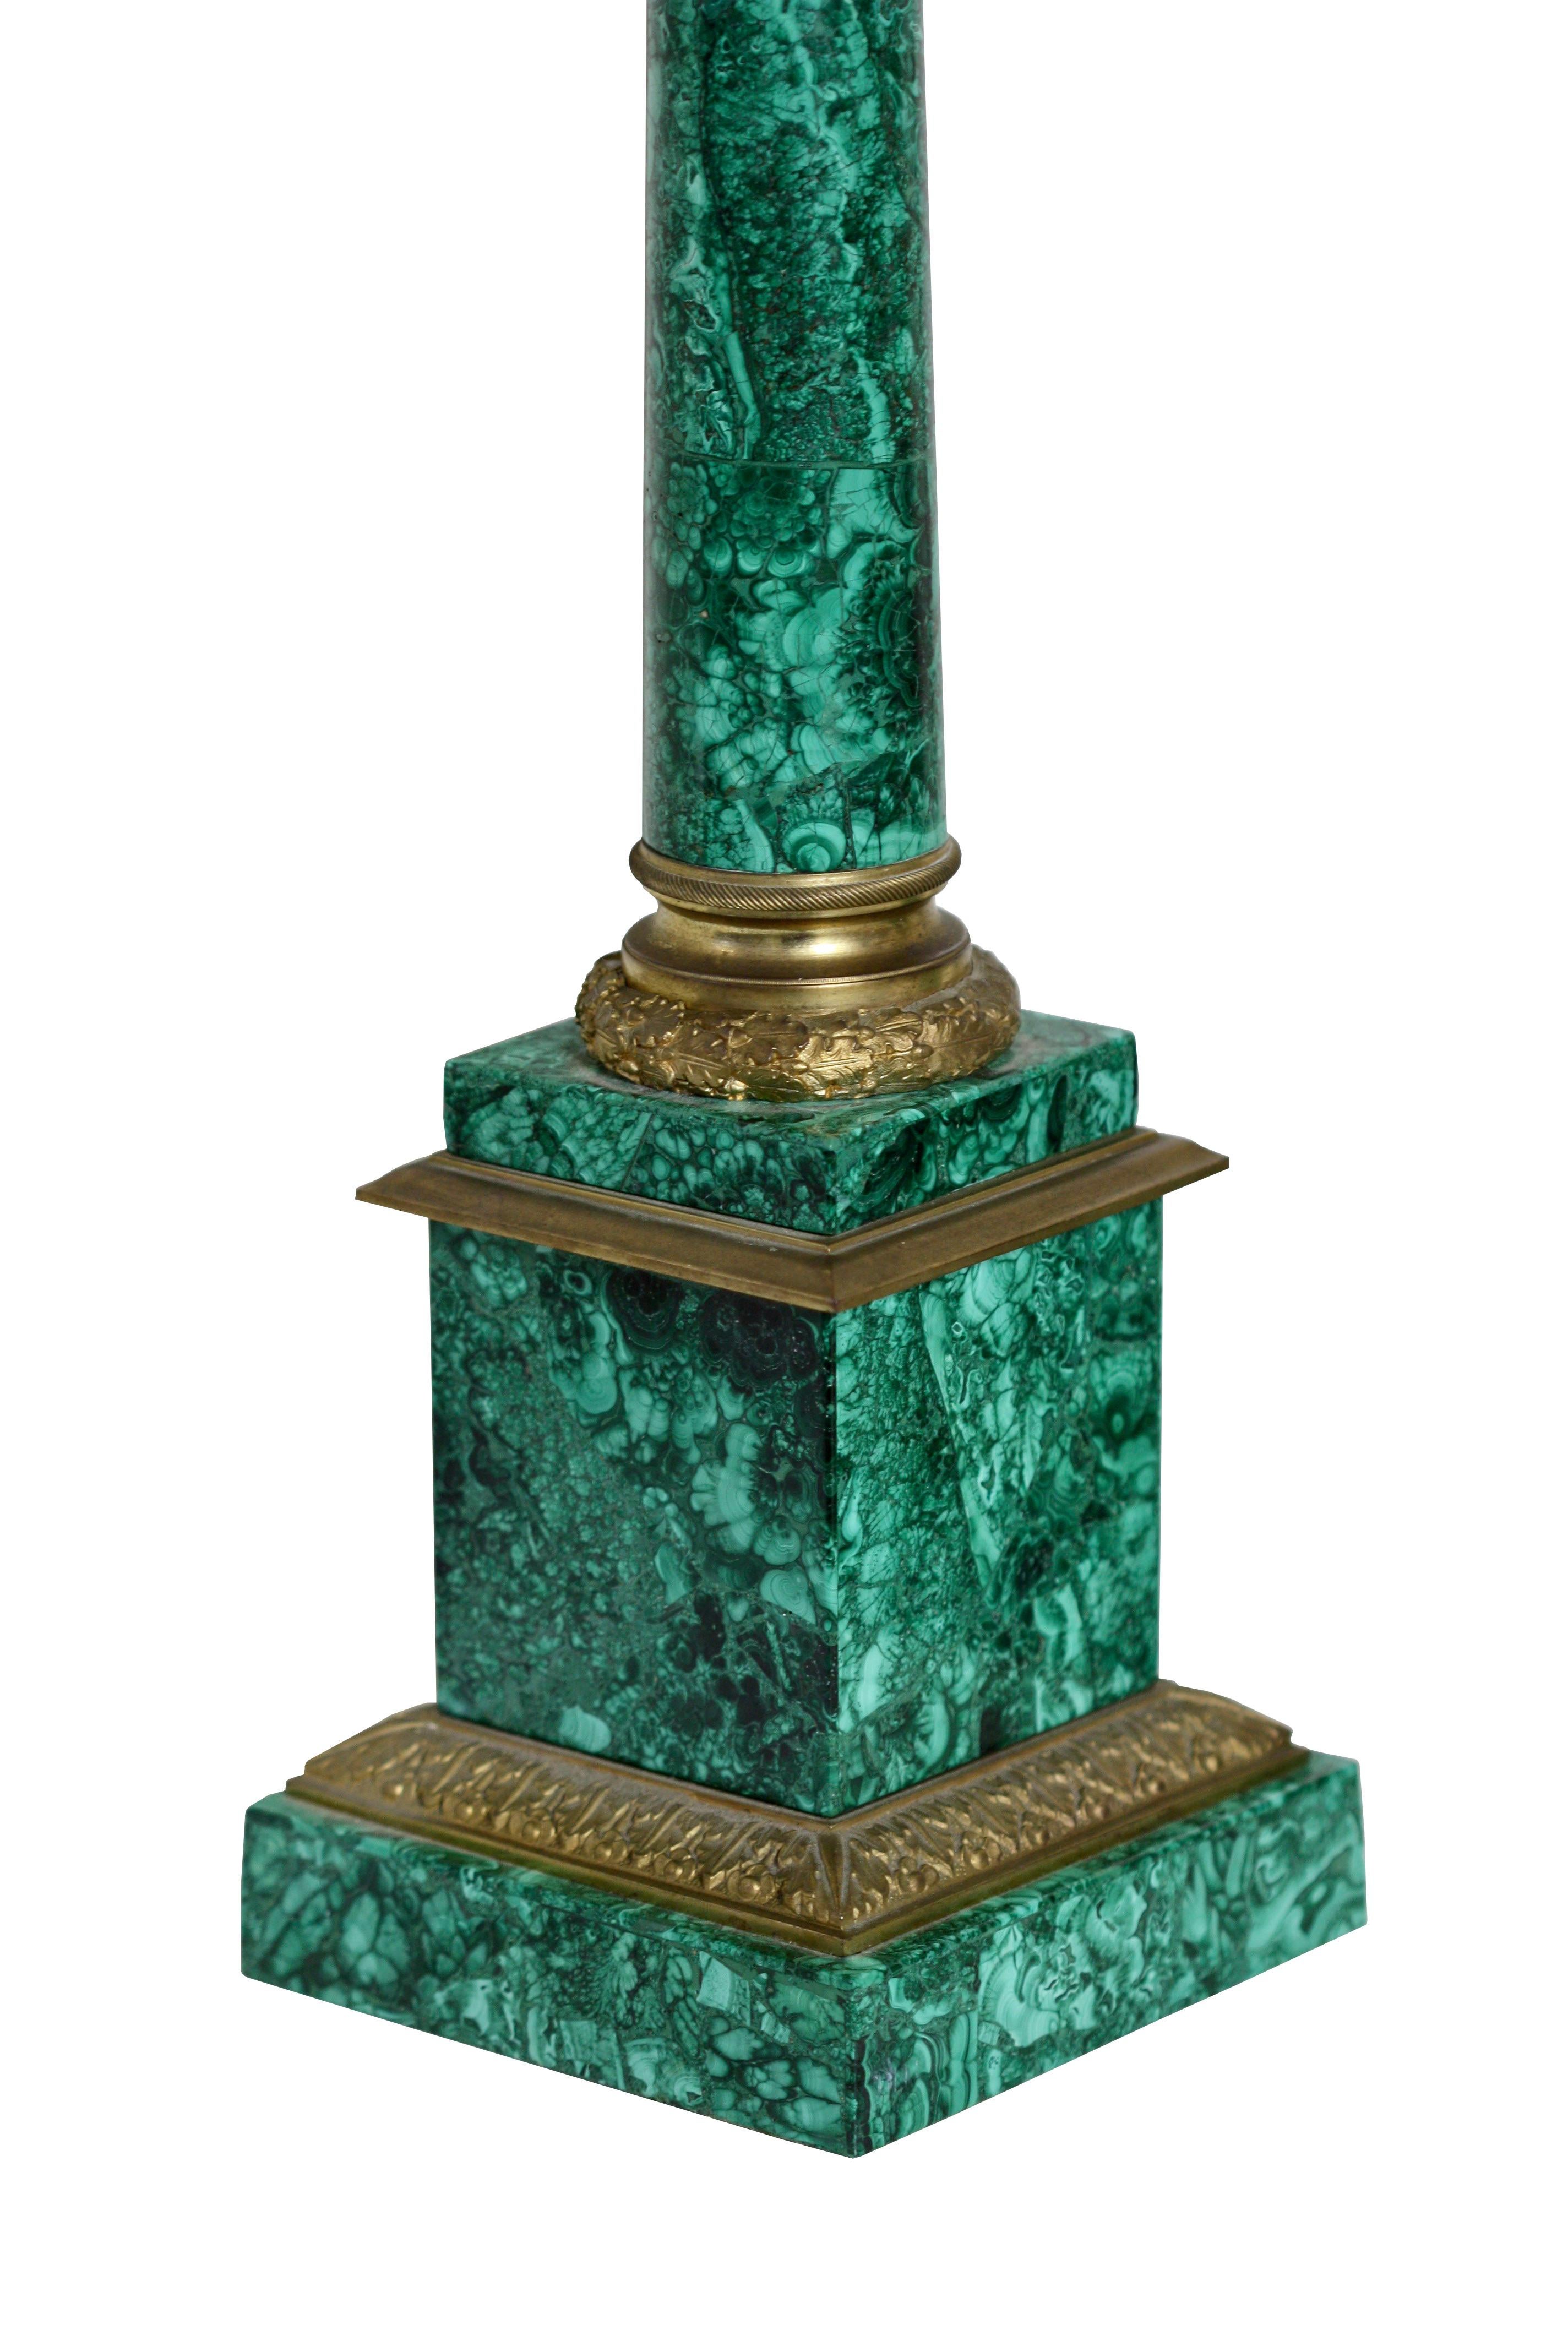 A pair of Russian style gilt-bronze mounted Malachite three-light candelabra
Fourth quarter of the 19th century
the round columns on a square plinth on bronze feet and issuing three S-shaped branches
Height 2ft. 3.12 in. (68.89 cm.); Width 5.12